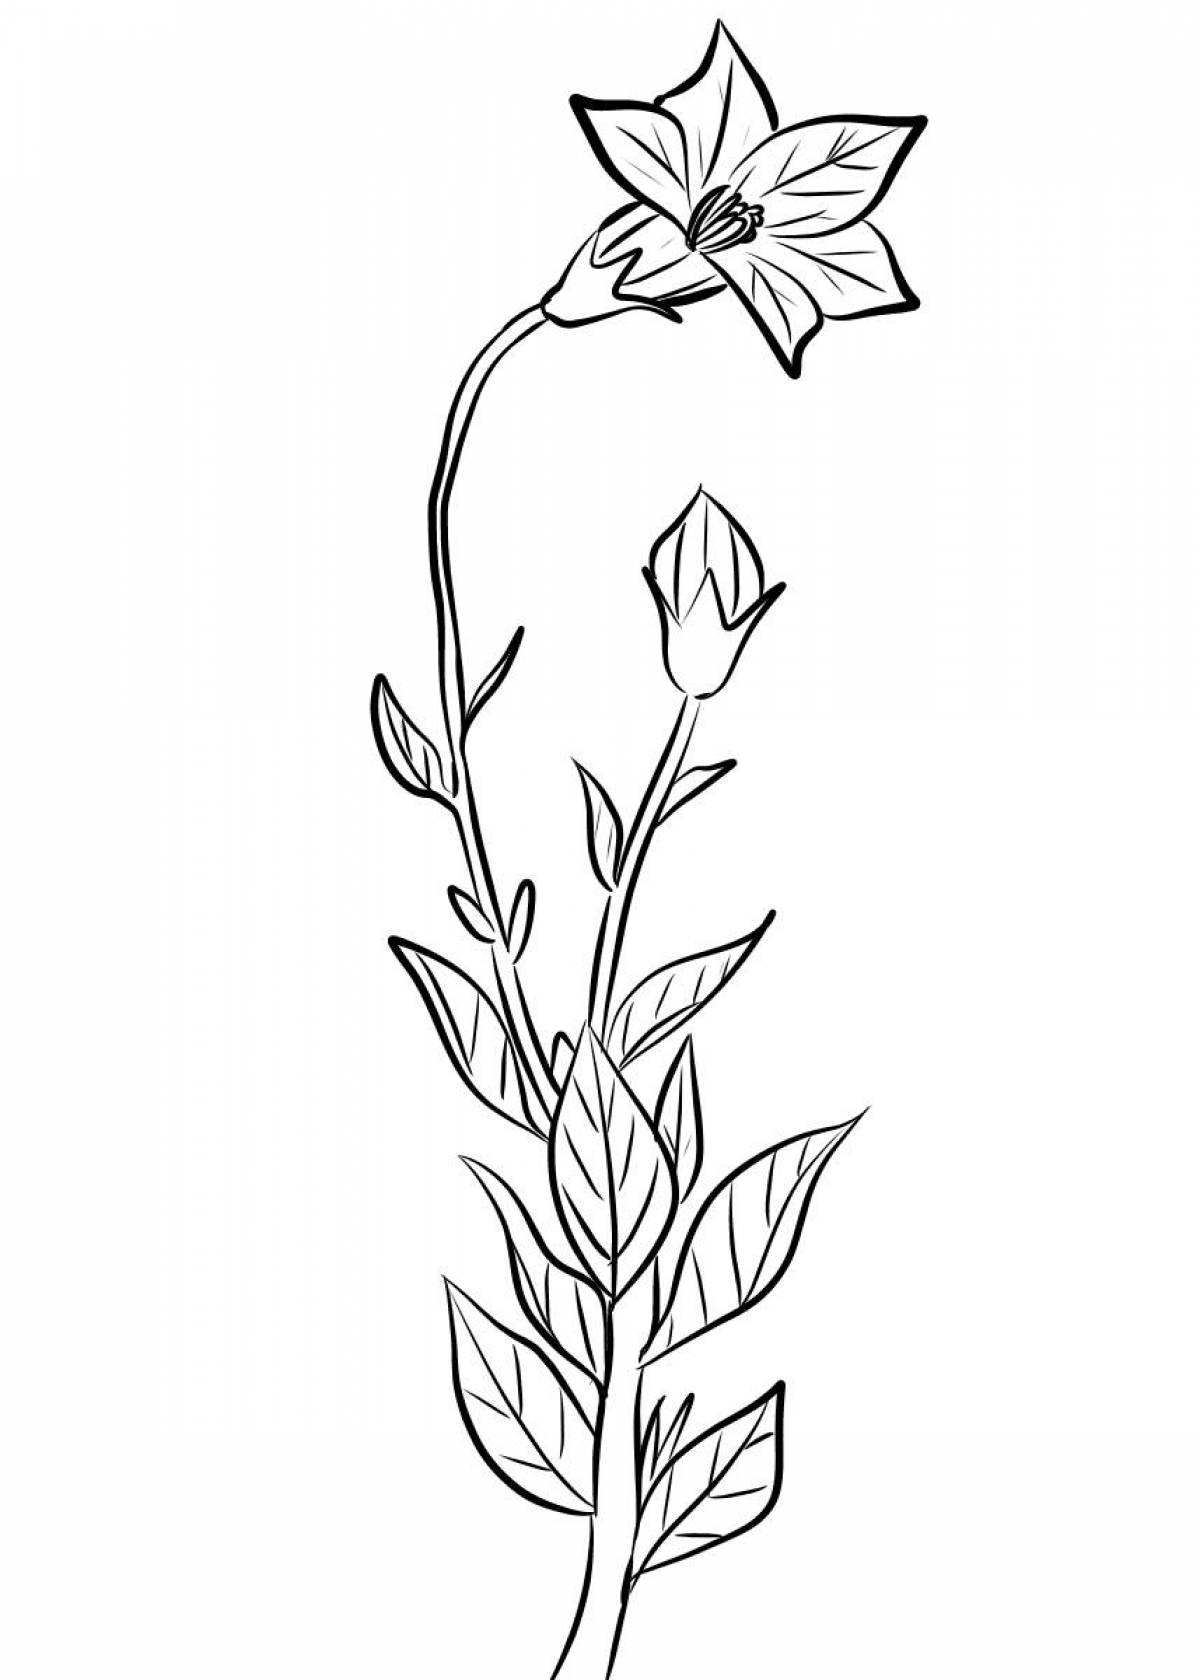 Bluebell coloring page